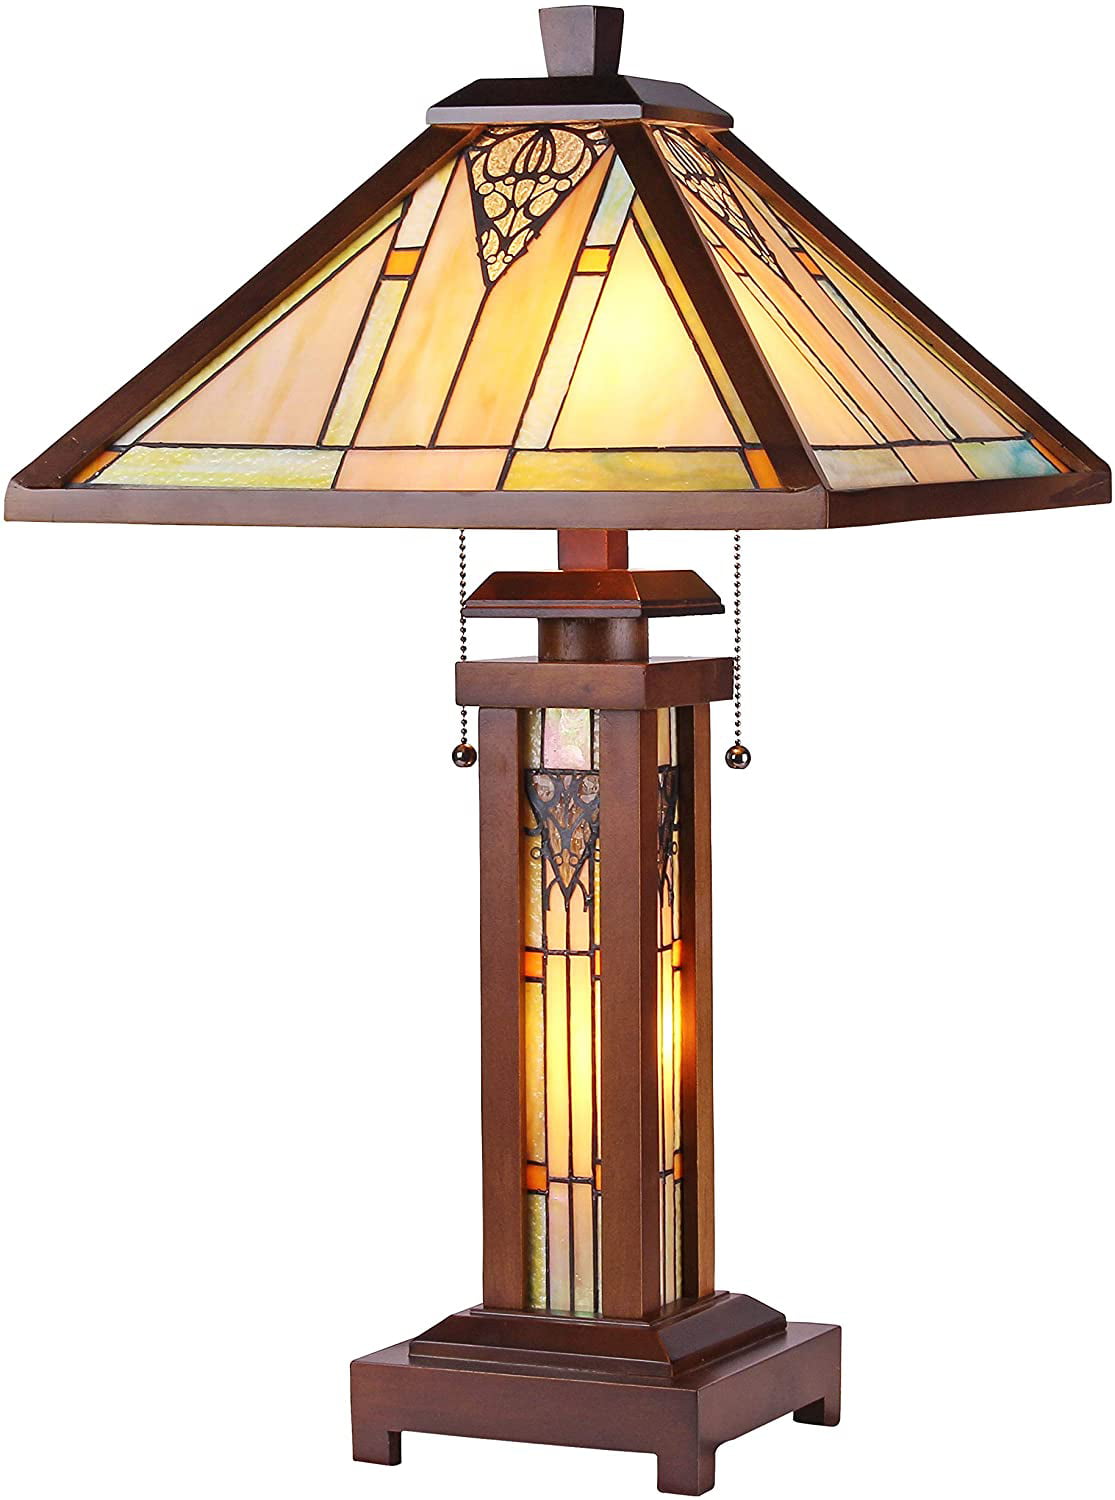 RADIANCE Goods -Style Mission 3 Light Double Lit Wooden Table Lamp 15" Shade